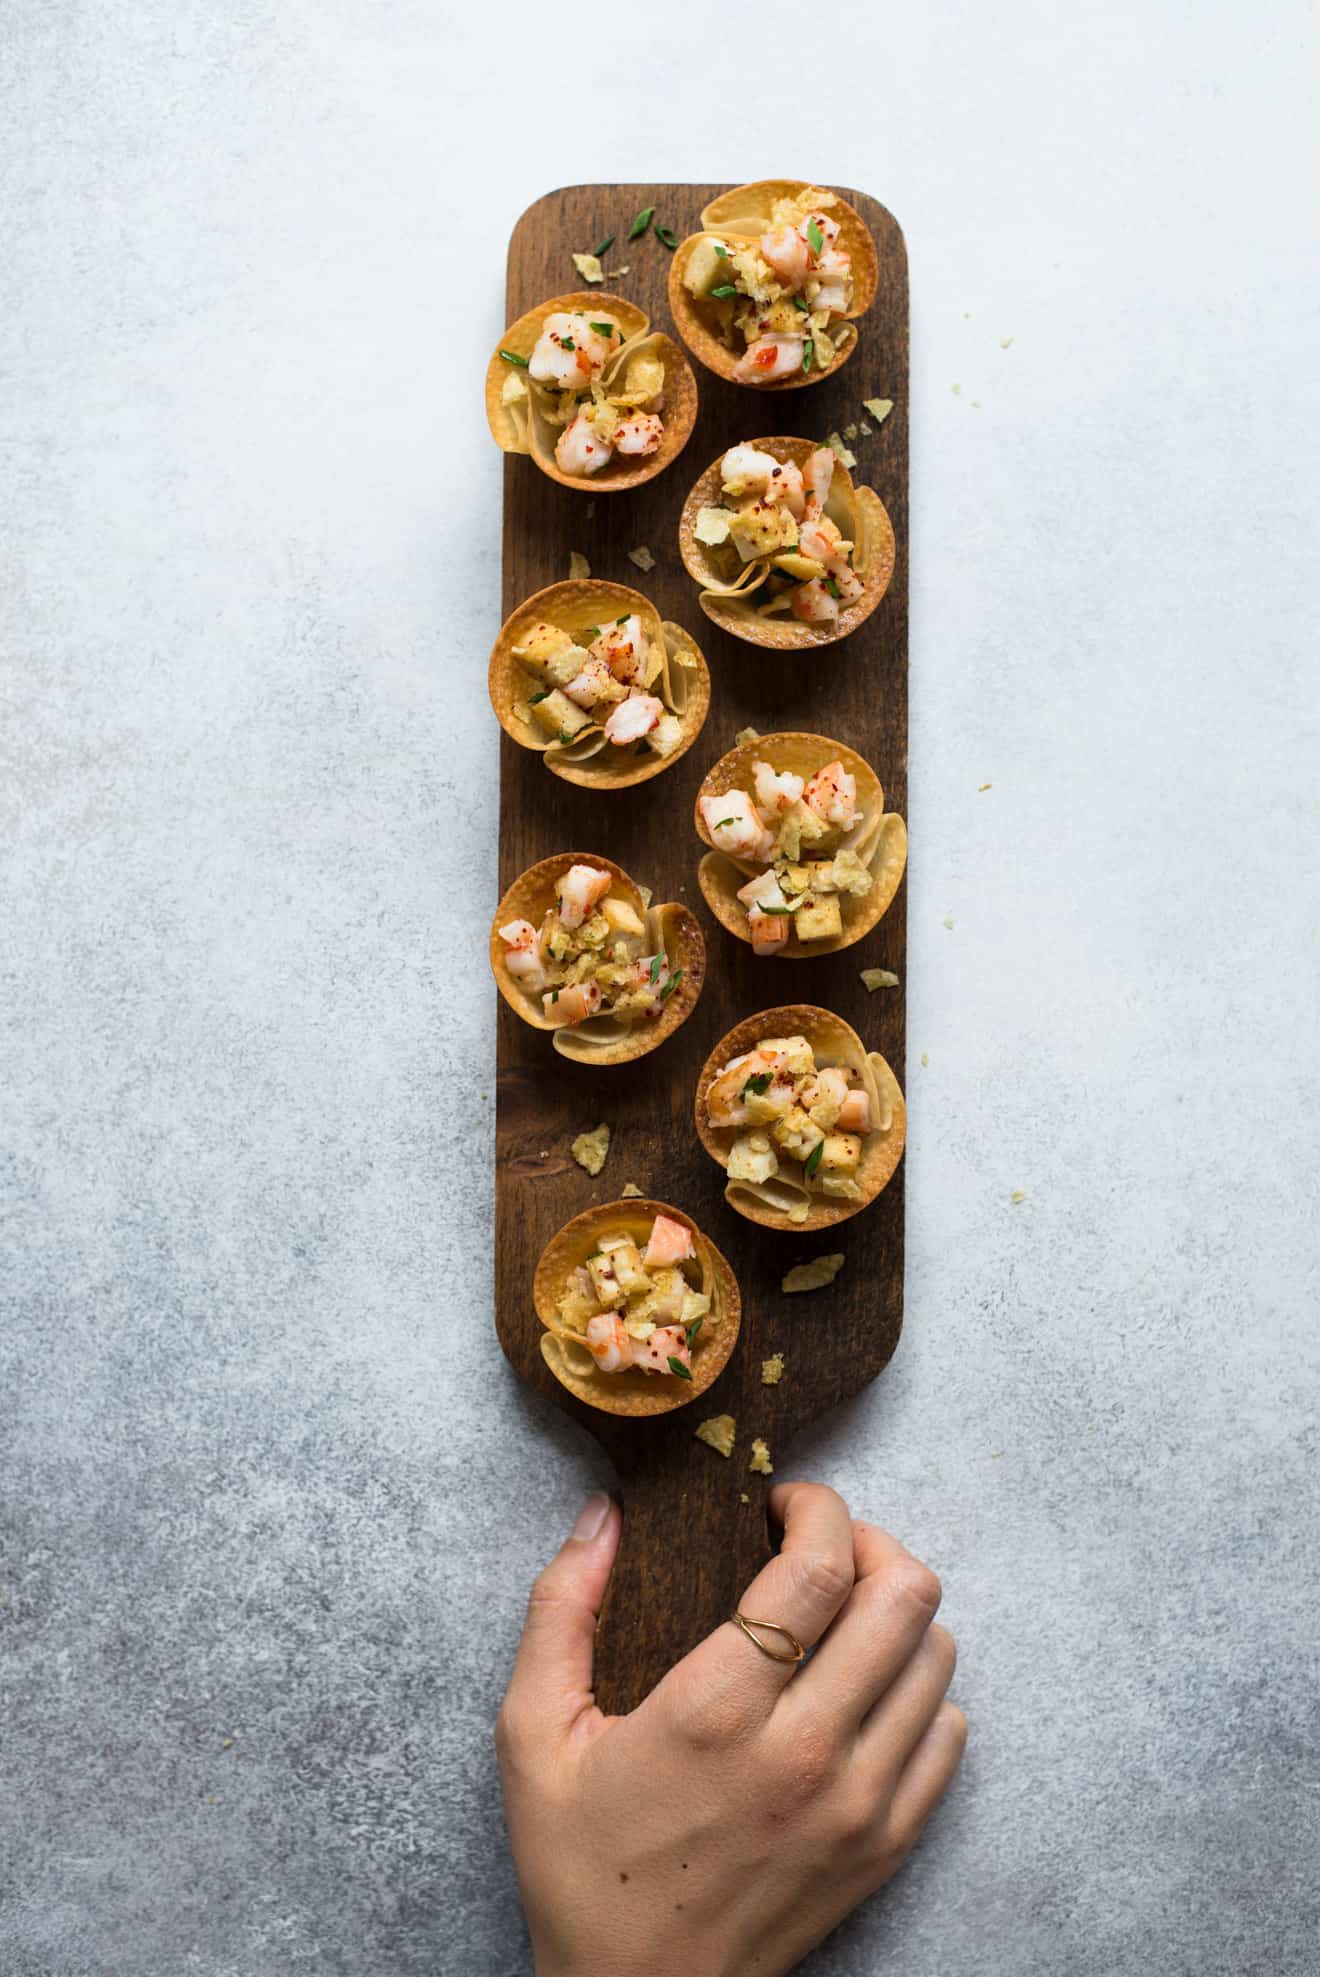 Sweet Chili Shrimp and Tofu Wonton Cups with Crushed Potato Chip Topping - these are the perfect party #appetizers! #healthy